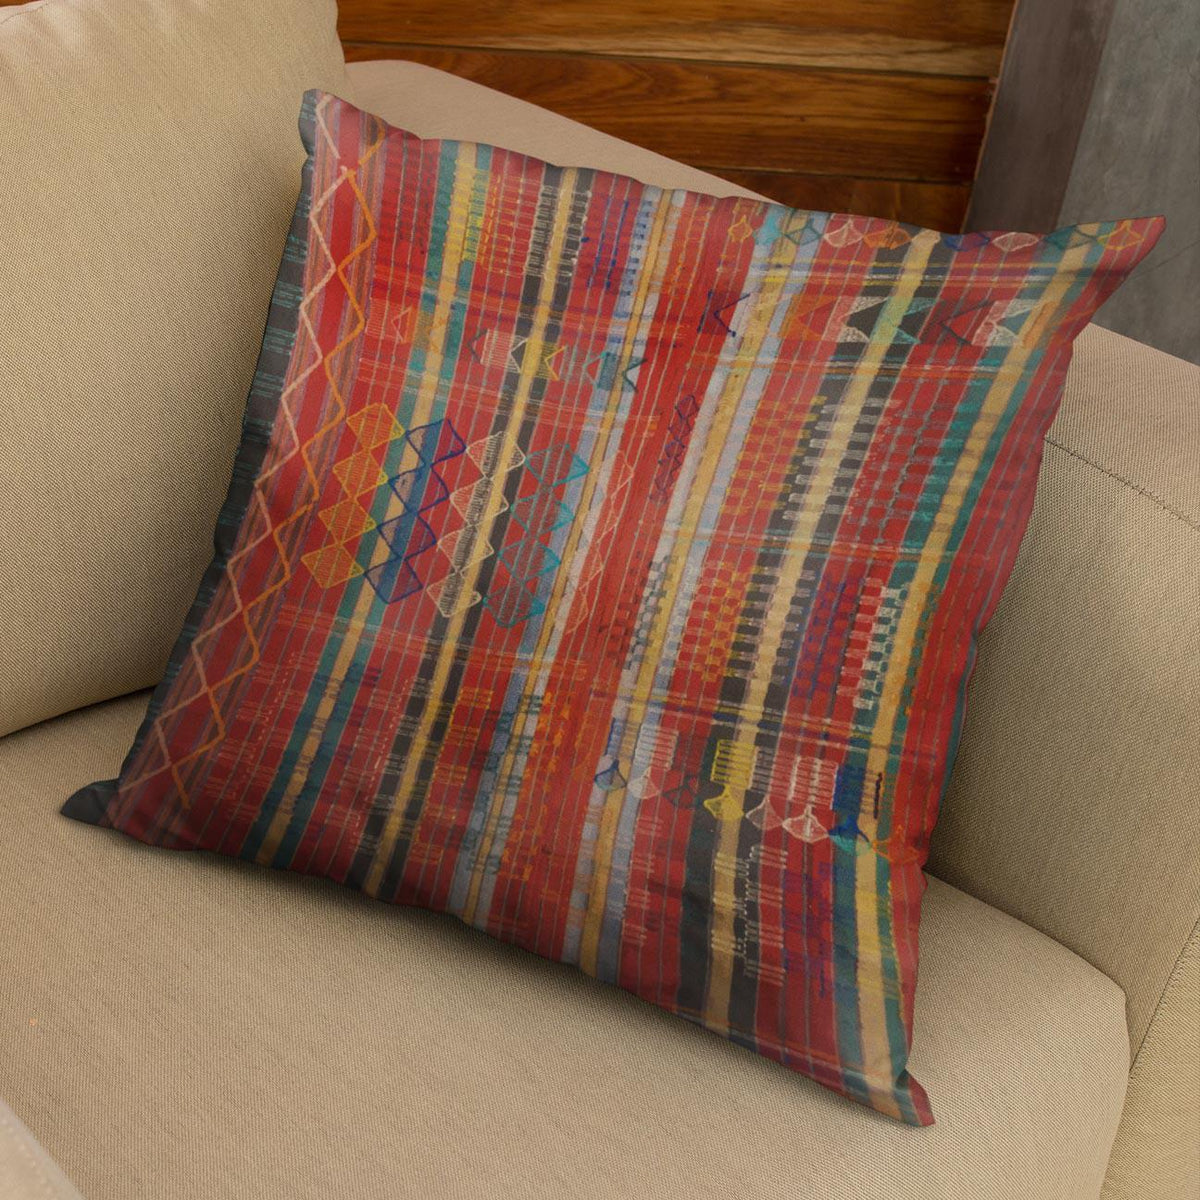 Tribal Pillow Nupe-Tribe Inspired African Tribal Pillows | Throw Pillows